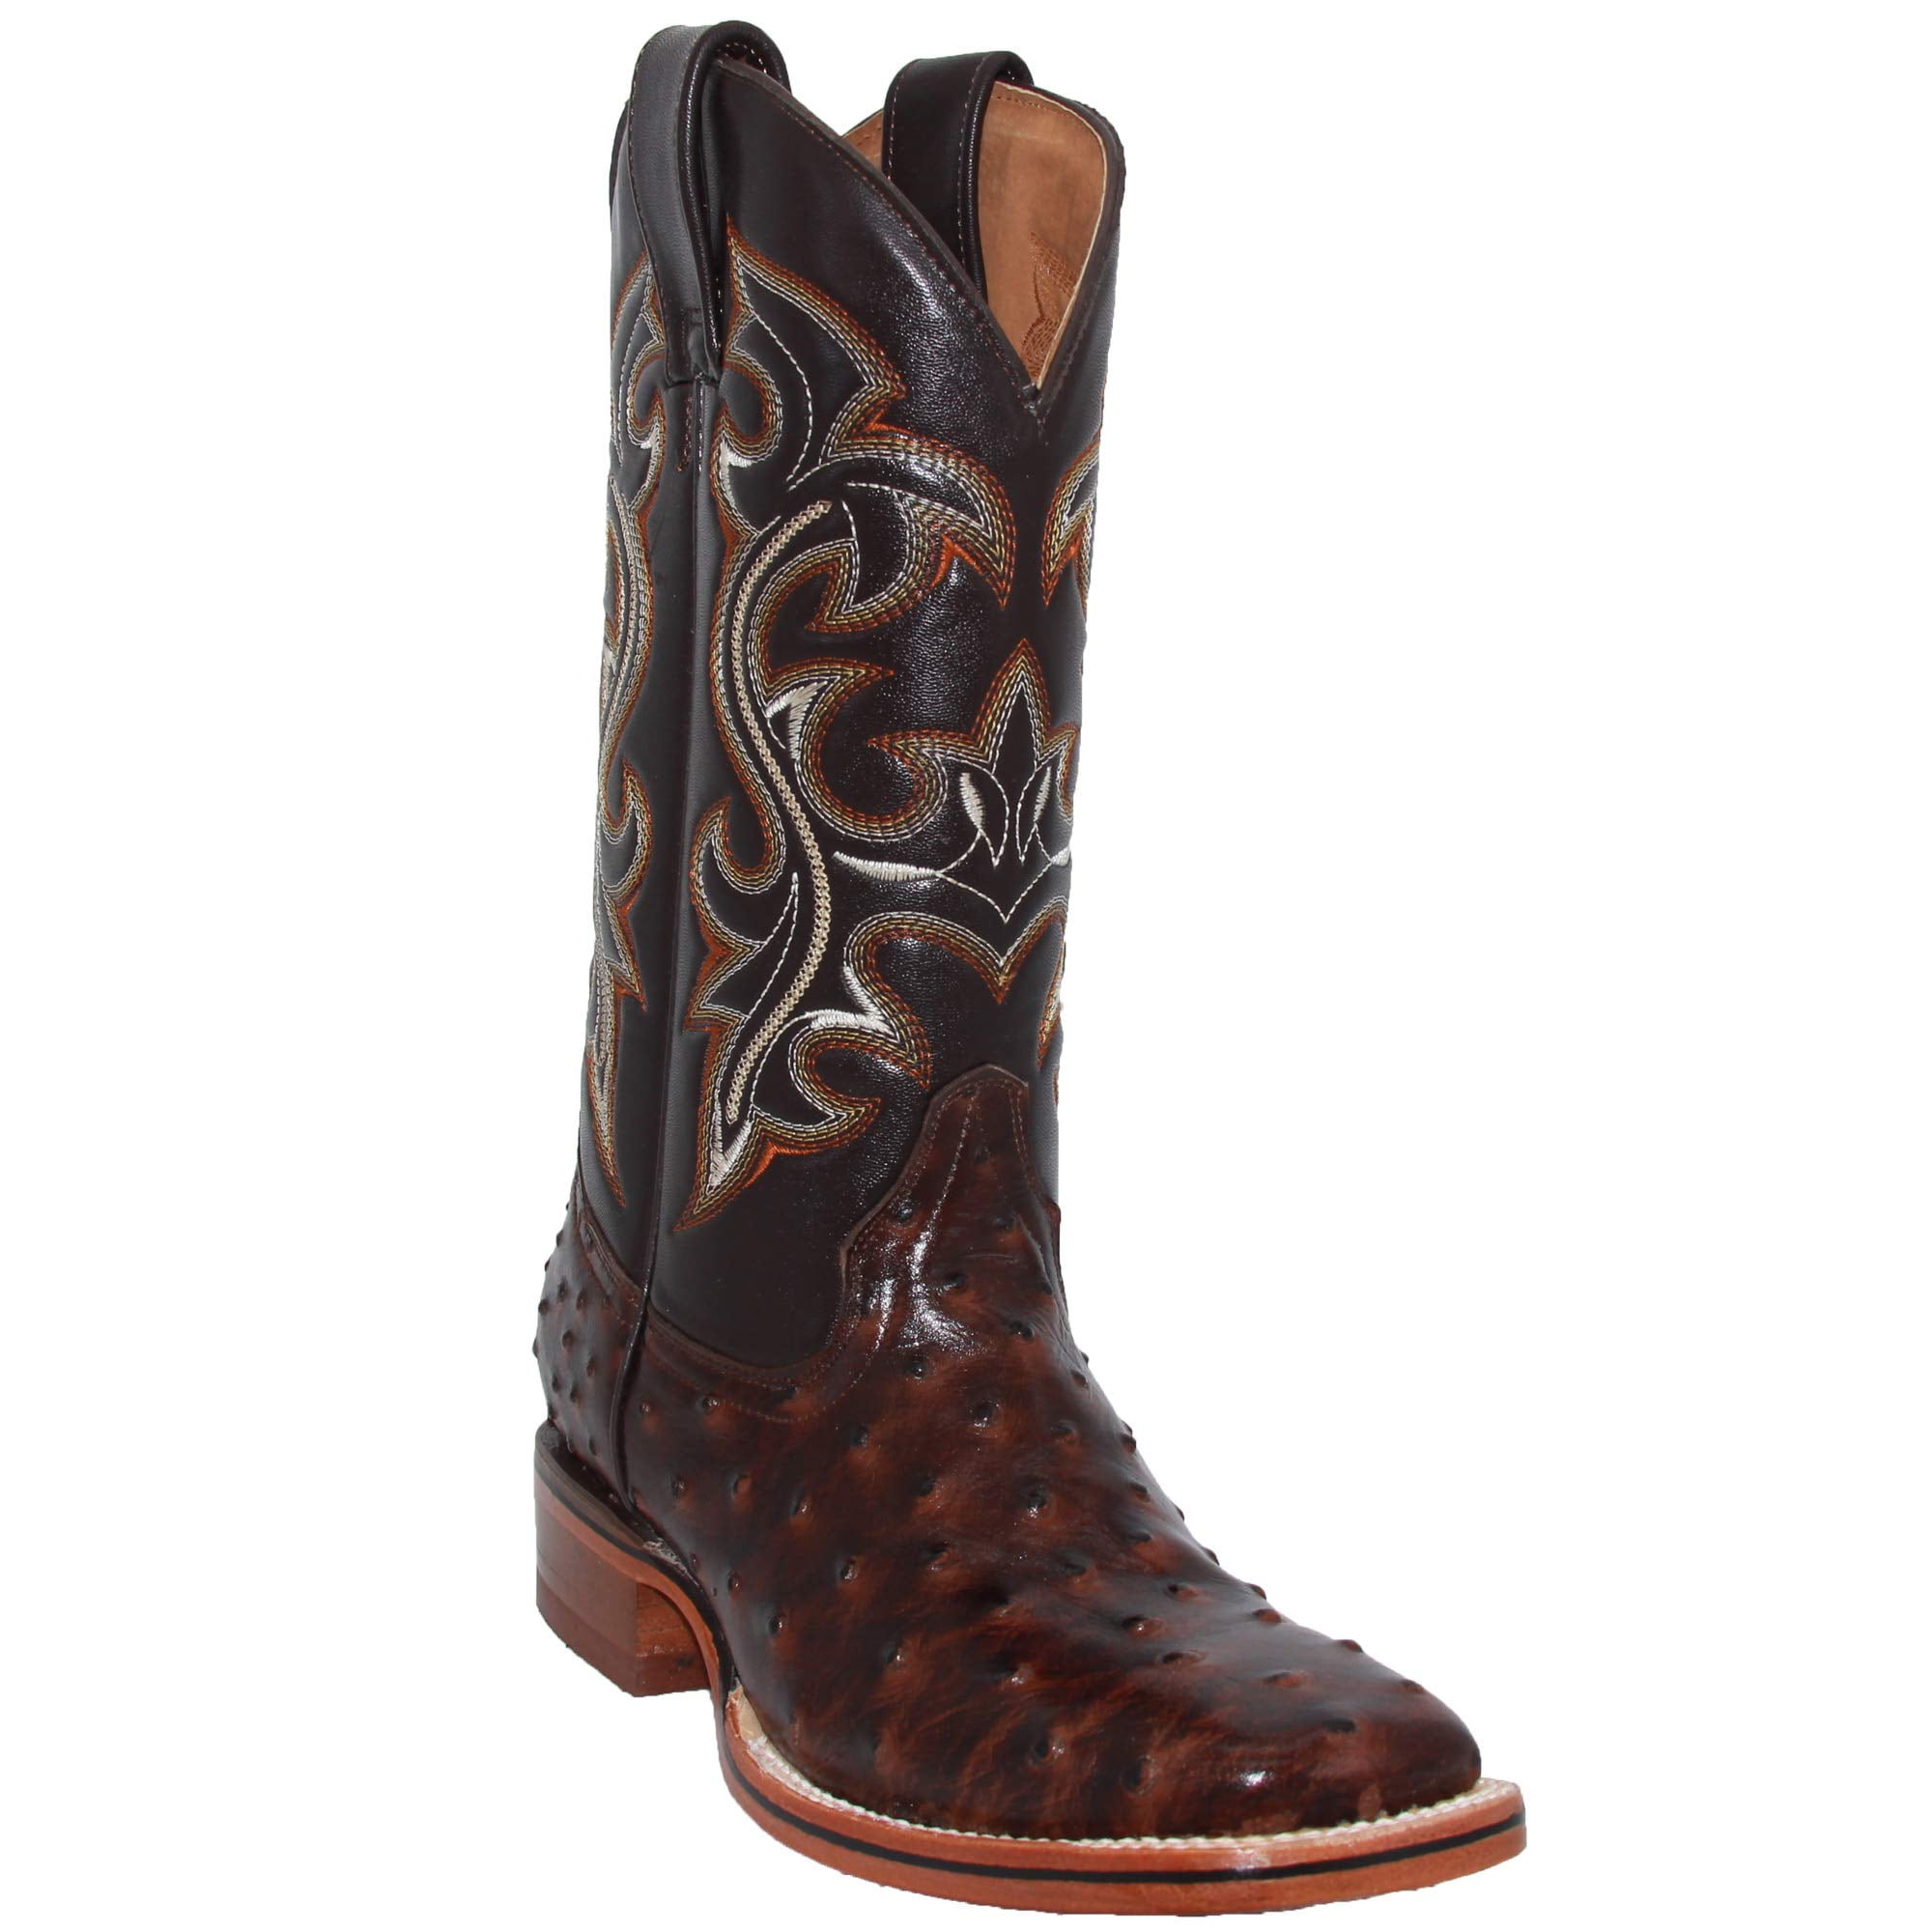 Men's Cowboy Boots Ostrich Print Leather Western Rodeo Square Toe Boots 